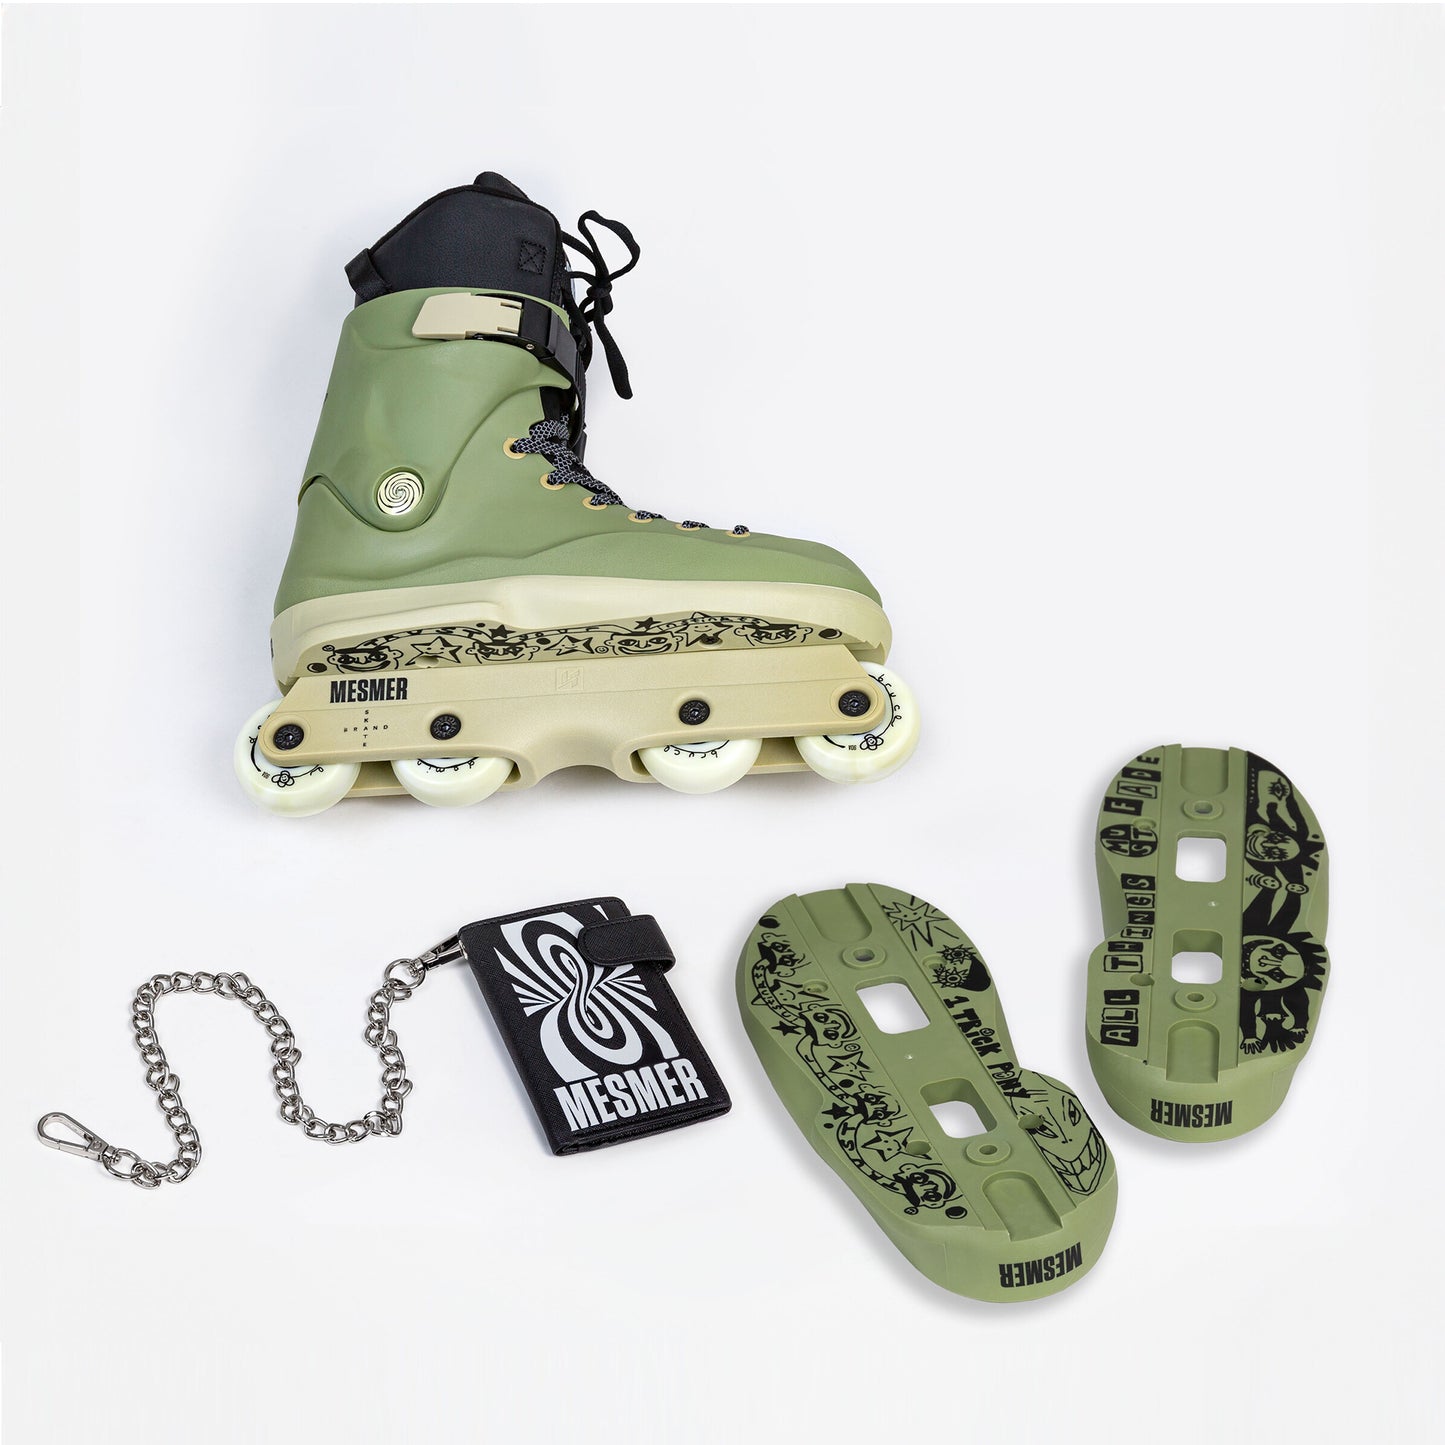 Bundle - Dom Bruce complete with DB green soulplates and chain wallet